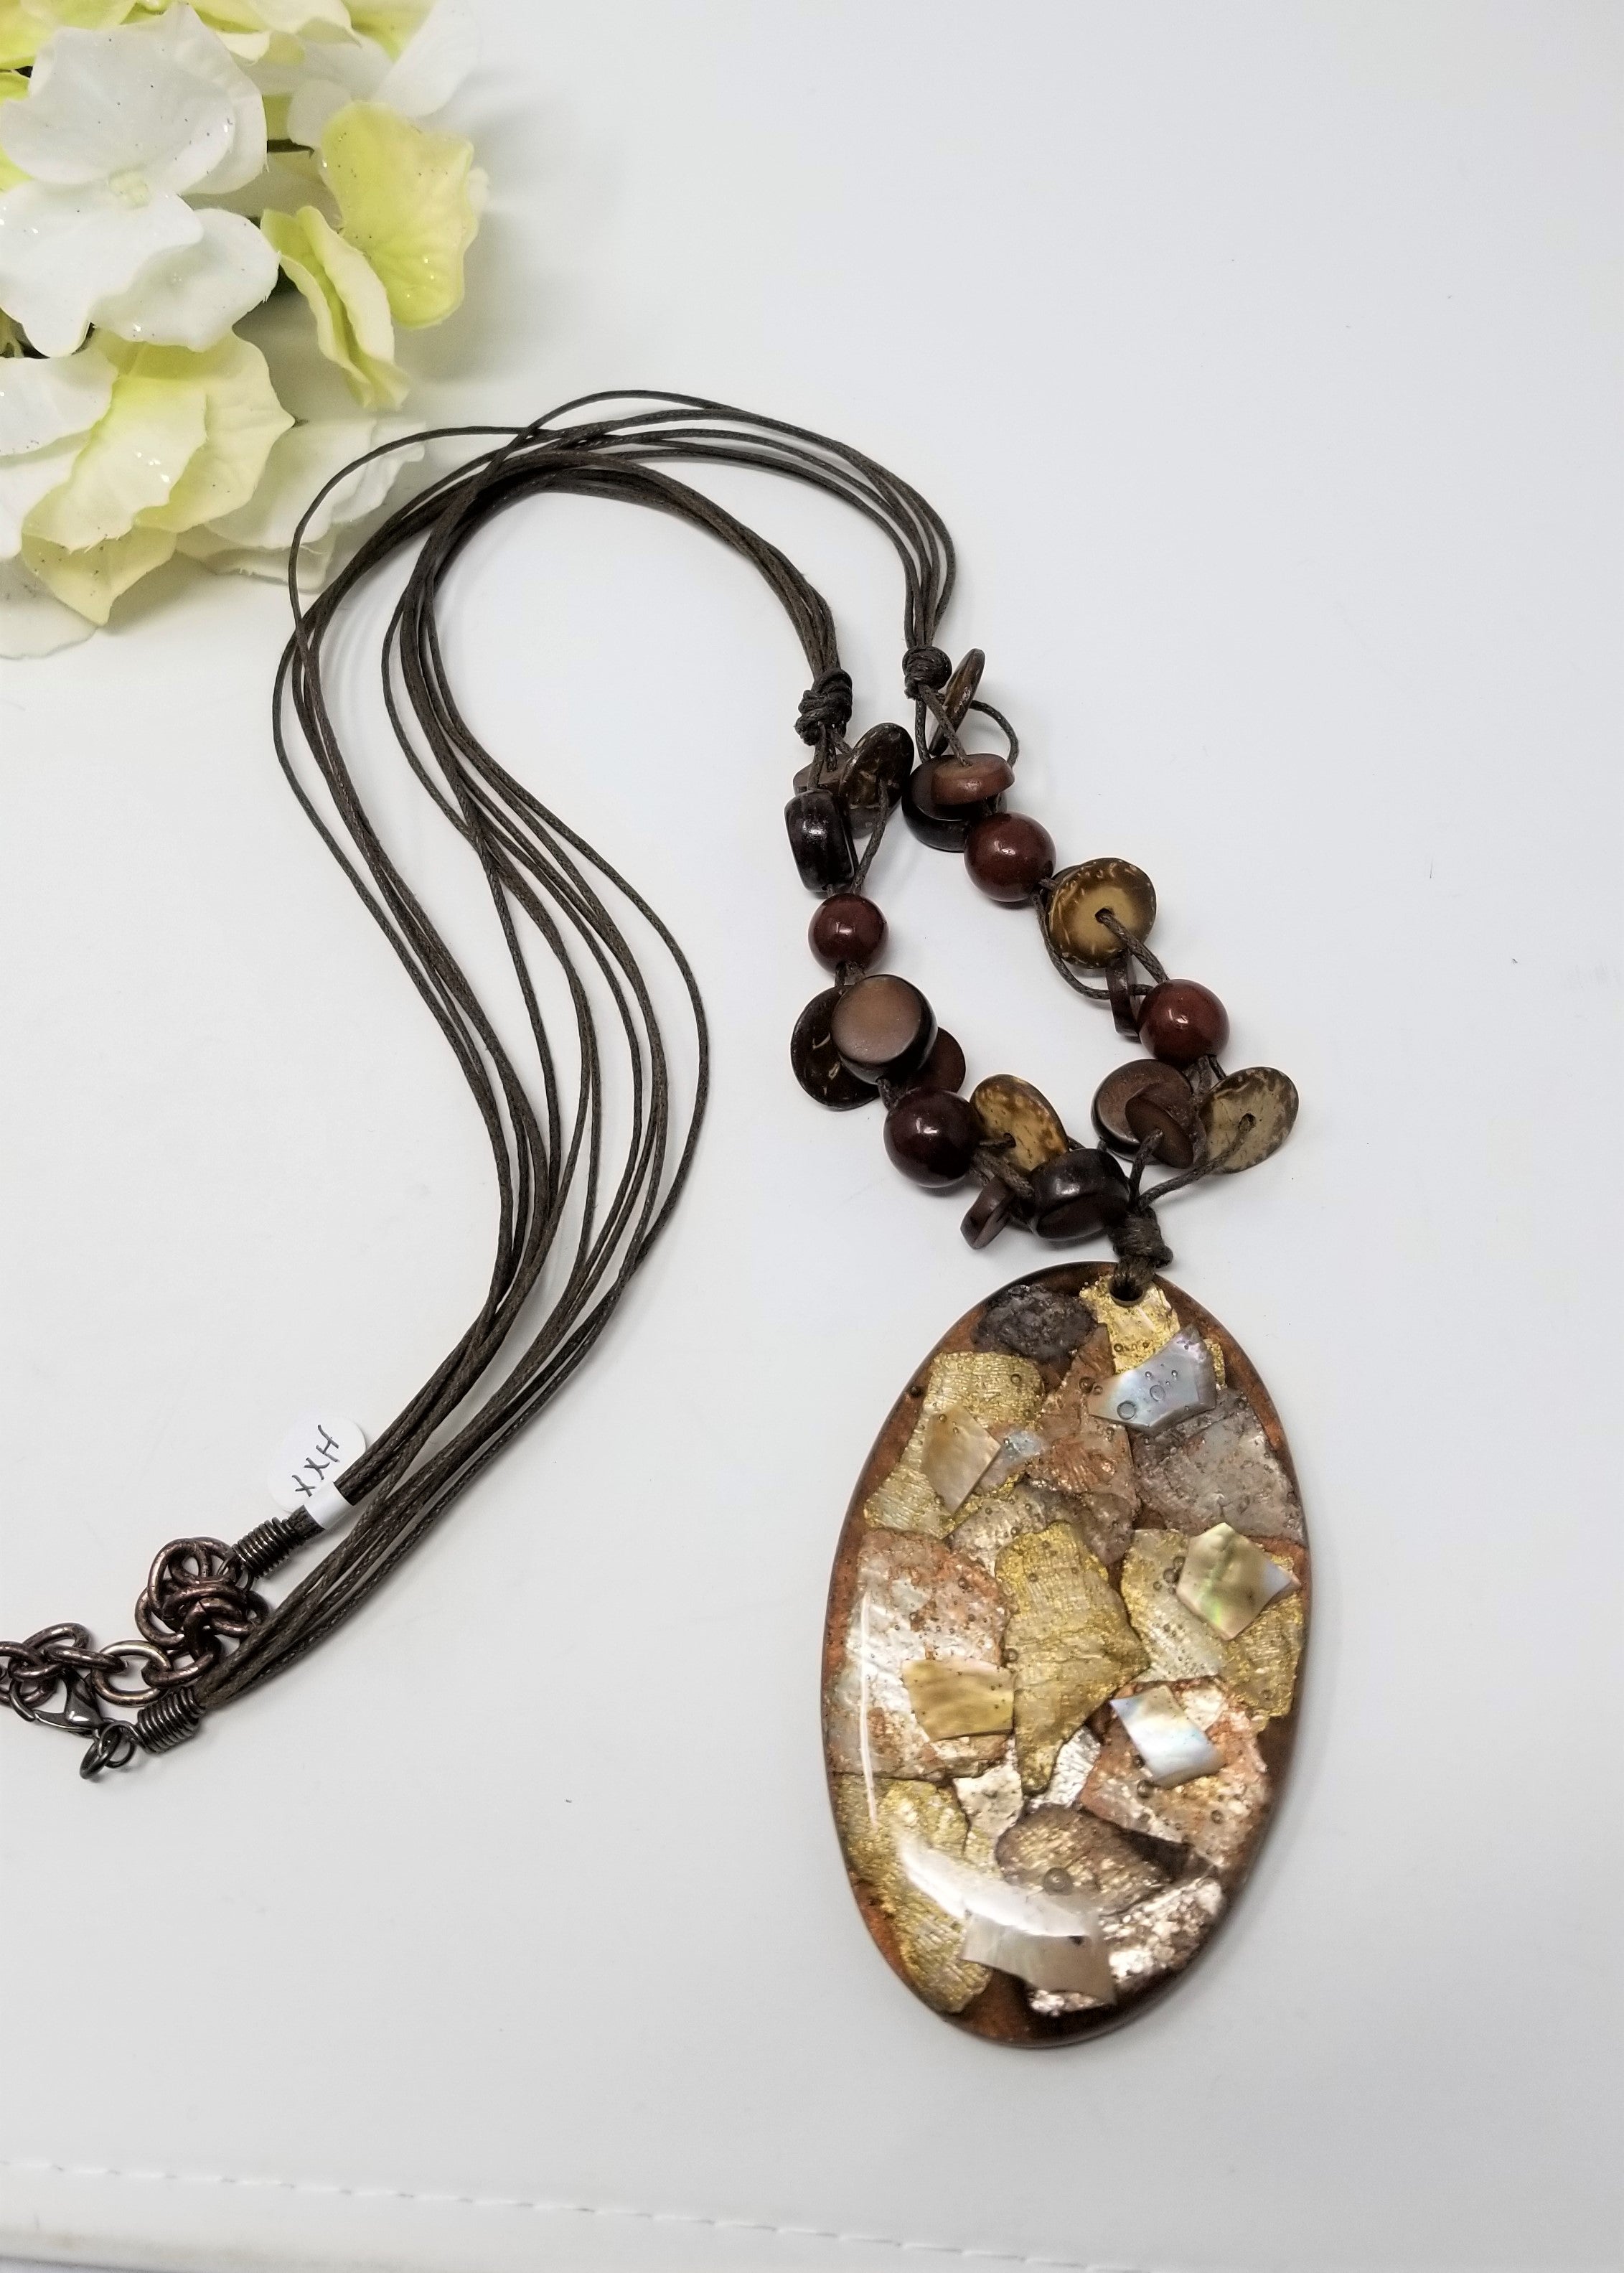 Spectacular Large Pendant-Necklace with MOP